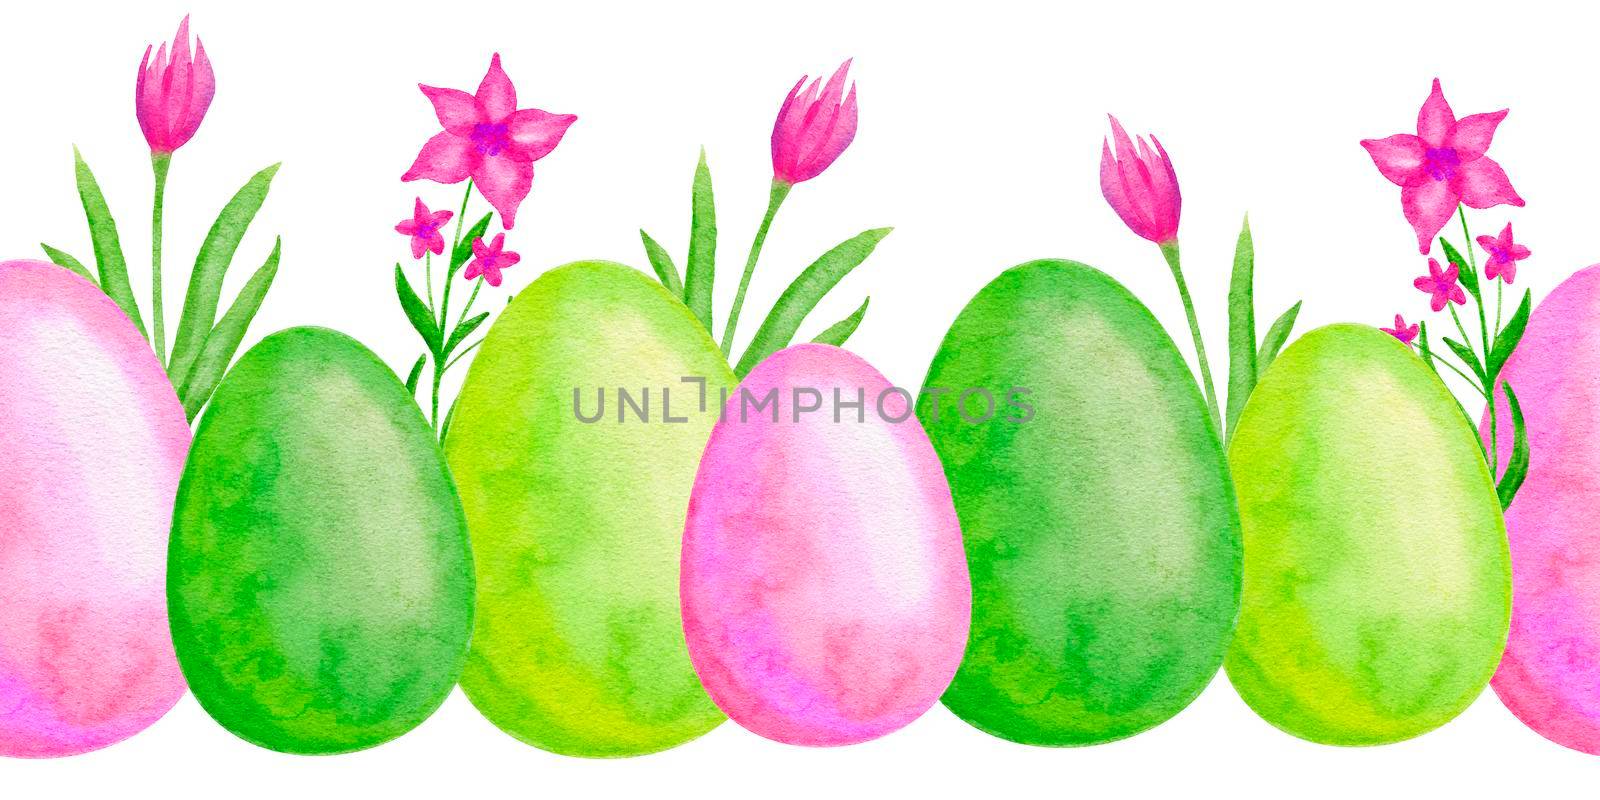 Seamless watercolor hand drawn horizontal borders with Easter eggs green pink tulip daisy flowers cartoon design. April spring print with bright funny elements for Easter cards invitations